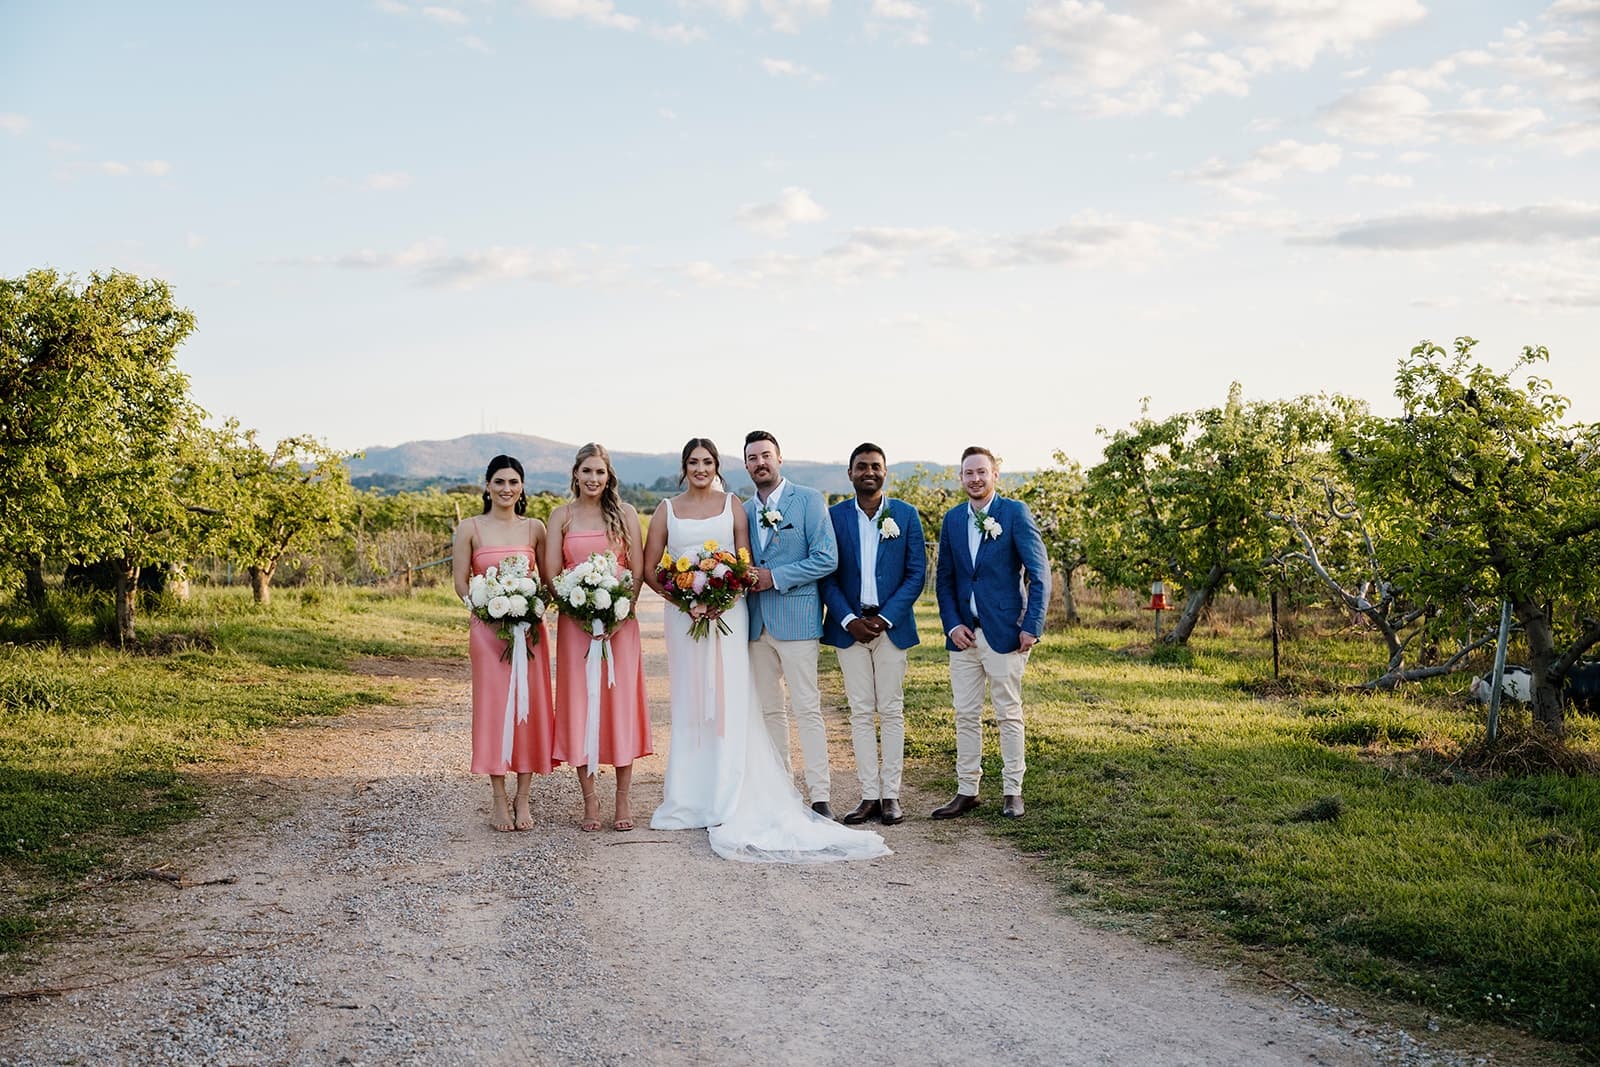 A Fairytale Wedding: Charlotte & Anthony Tie the Knot in Orange NSW